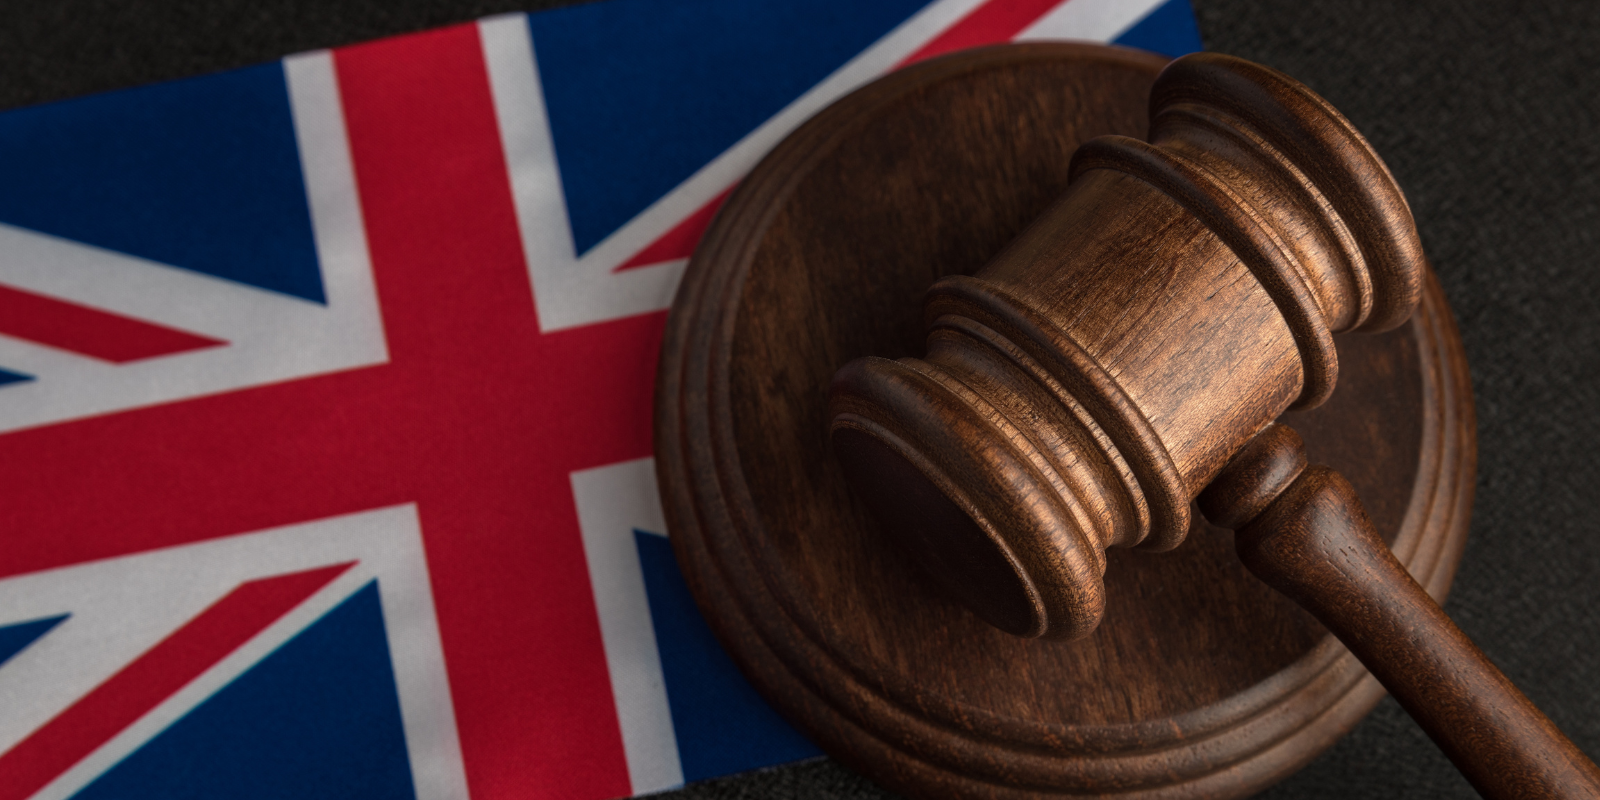 Strengthening the Stance: The Tripling of Fines for Assisting Illegal Migrants in the United Kingdom